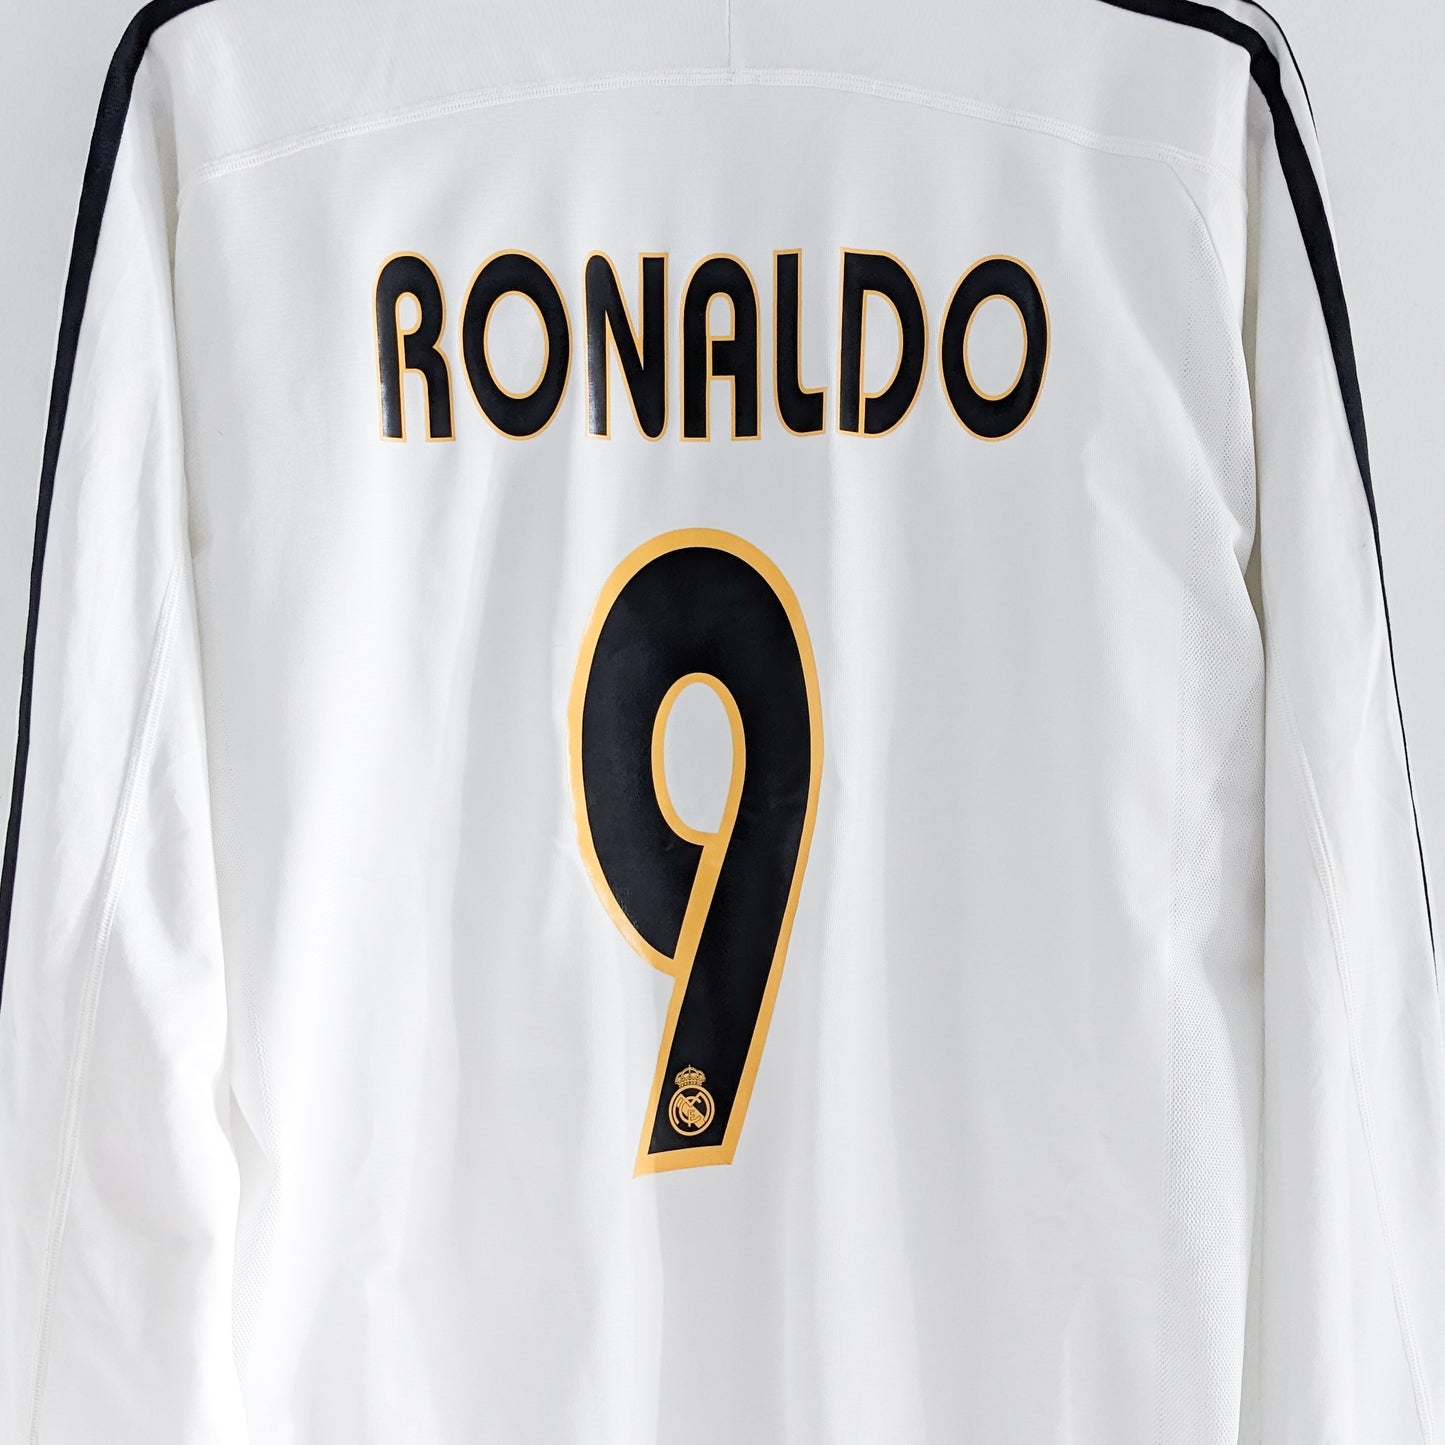 Authentic Real Madrid 2003/2004 Home - Ronaldo #9 Size L (Long sleeve) (Player issue)